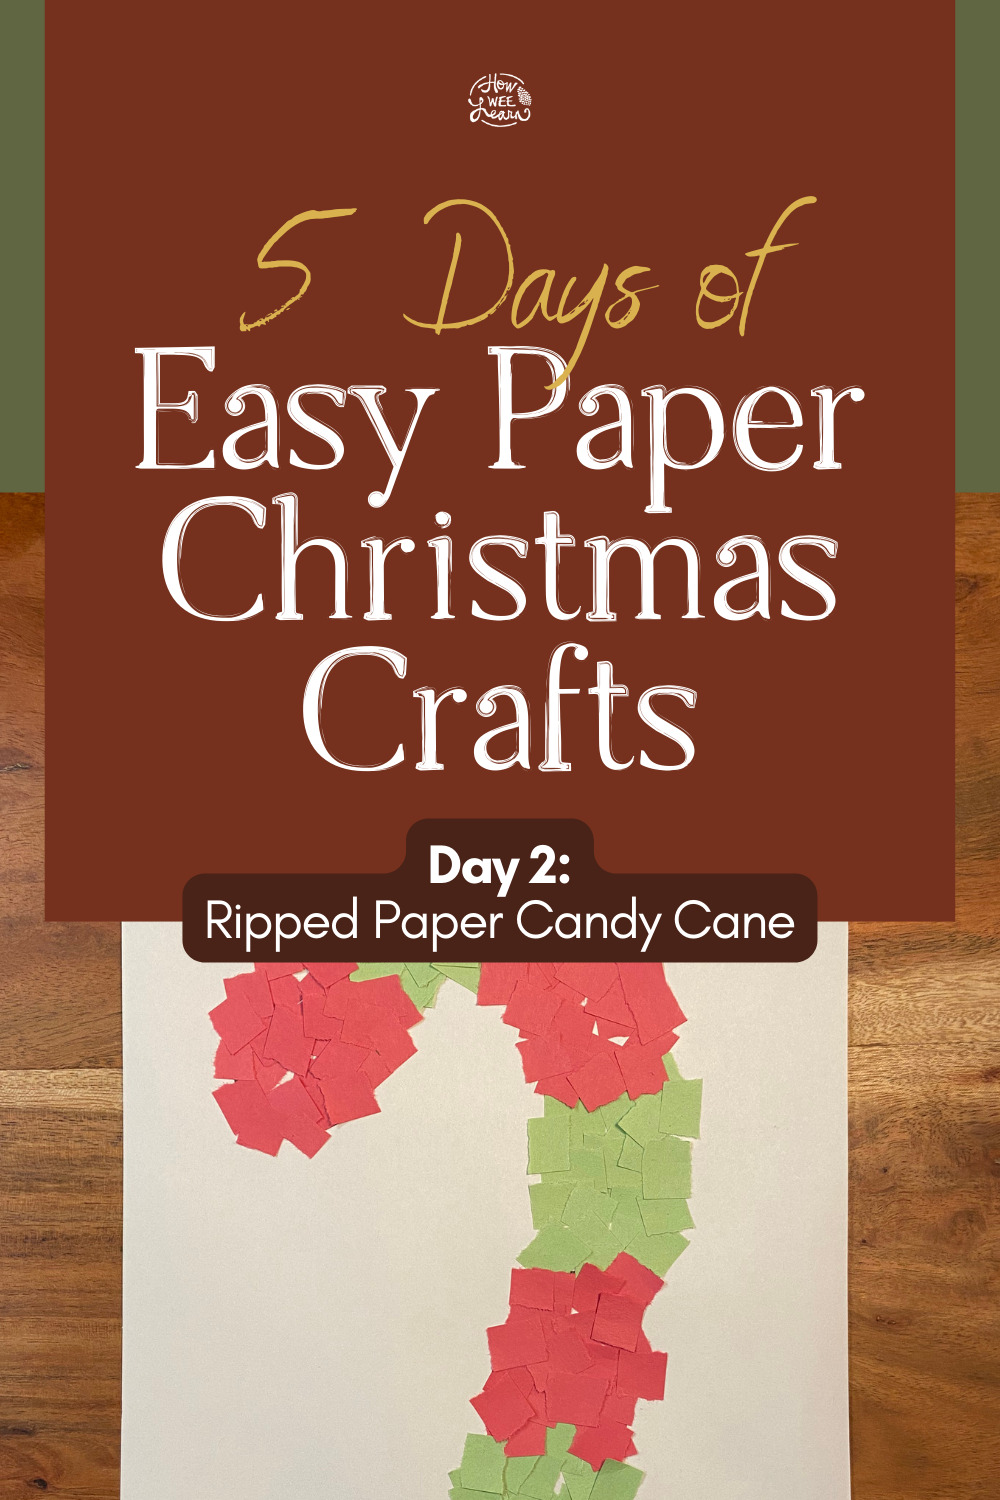 Ripped Paper Candy Cane Craft